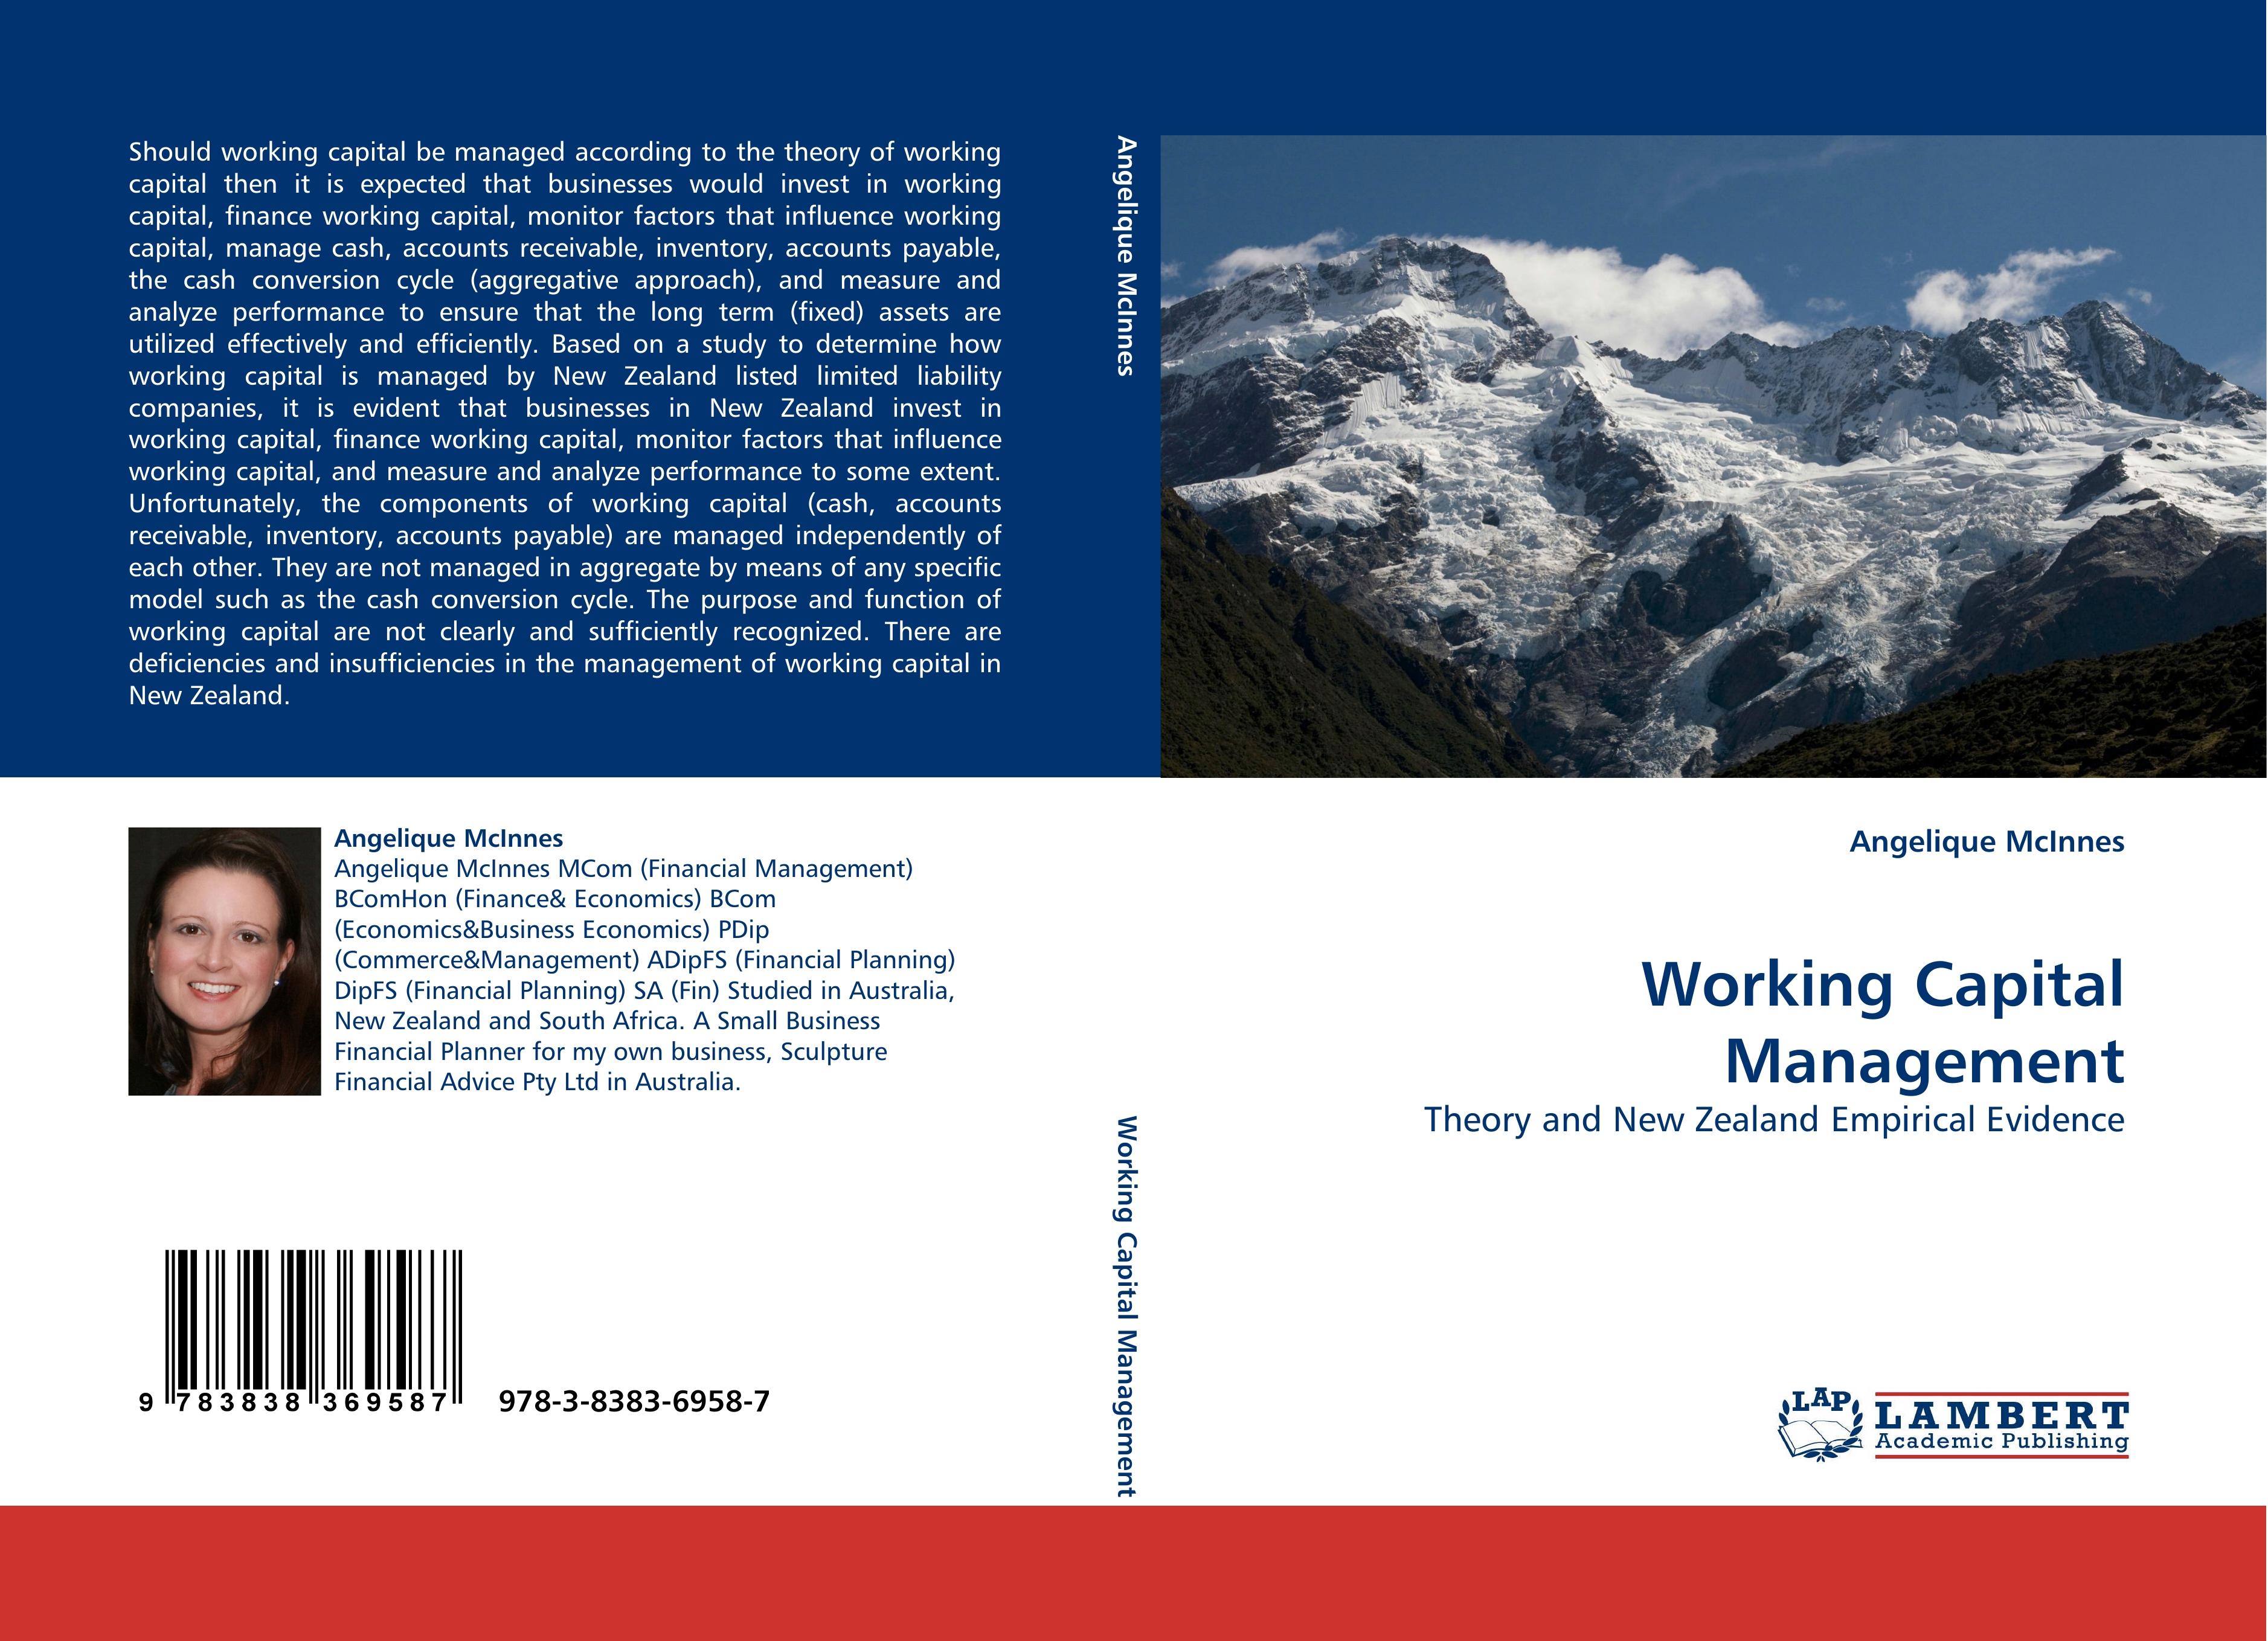 Working Capital Management / Theory and New Zealand Empirical Evidence / Angelique McInnes / Taschenbuch / Paperback / 128 S. / Englisch / 2010 / LAP LAMBERT Academic Publishing / EAN 9783838369587 - McInnes, Angelique